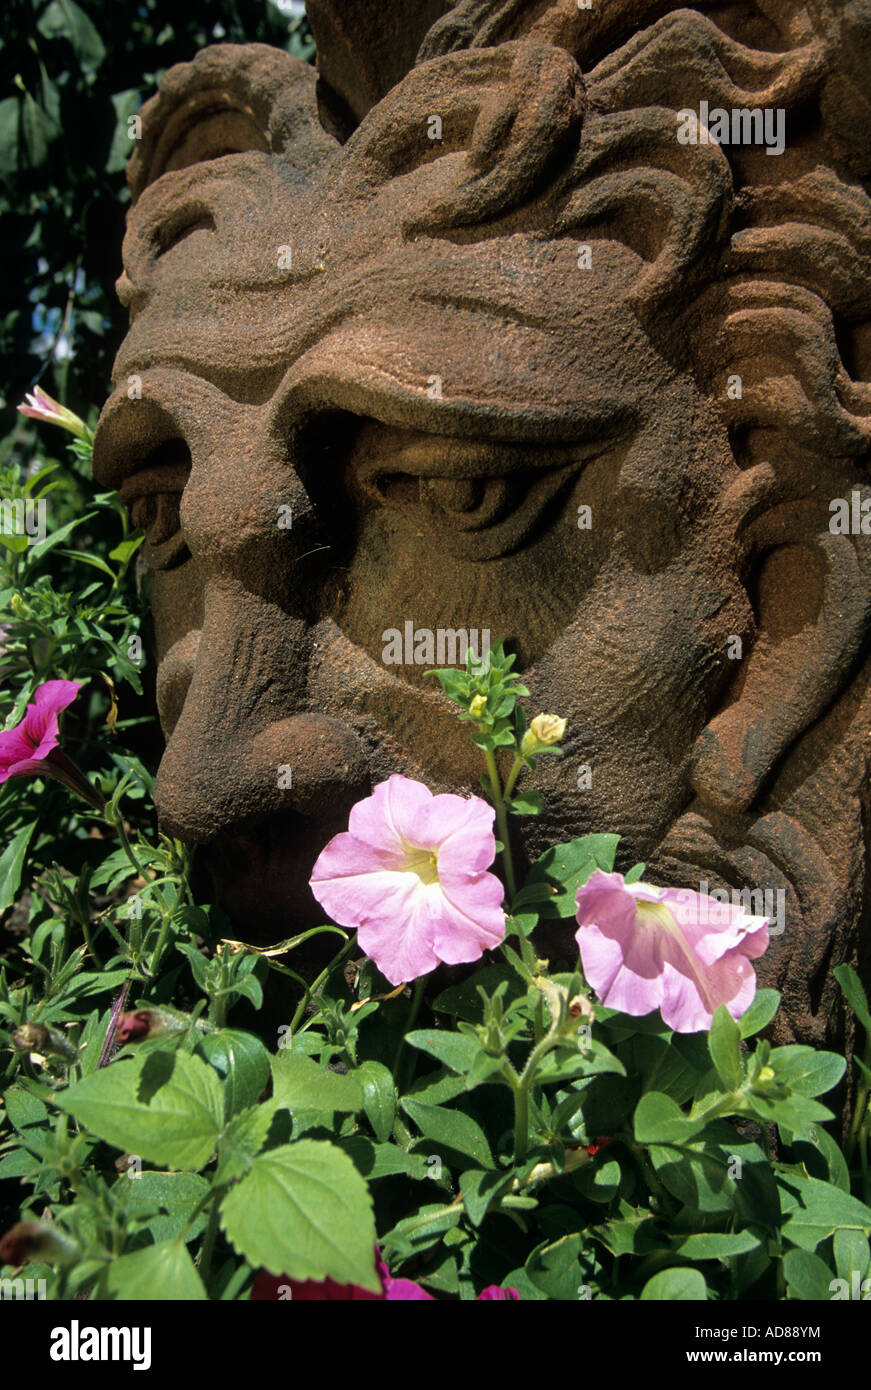 ANTIQUE KETTLE RIVER SANDSTONE GARGOYLE SURROUNDED BY PETUNIAS. MINNESOTA GARDEN IN JULY. Stock Photo